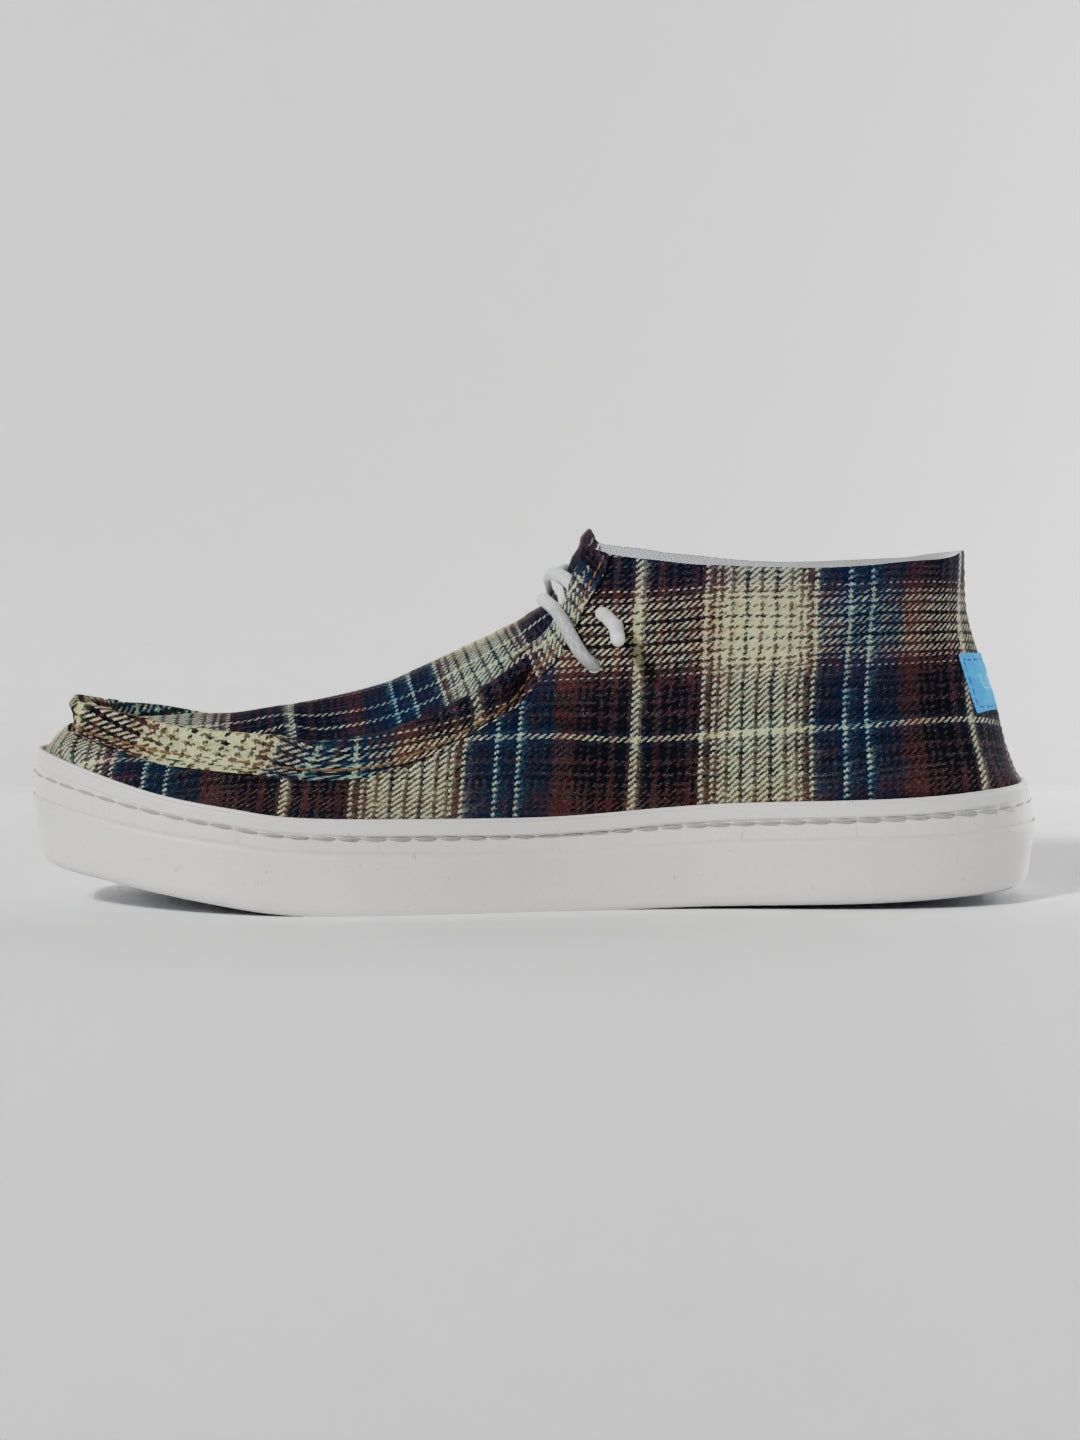 The Luna High Top Brown & Beige Check